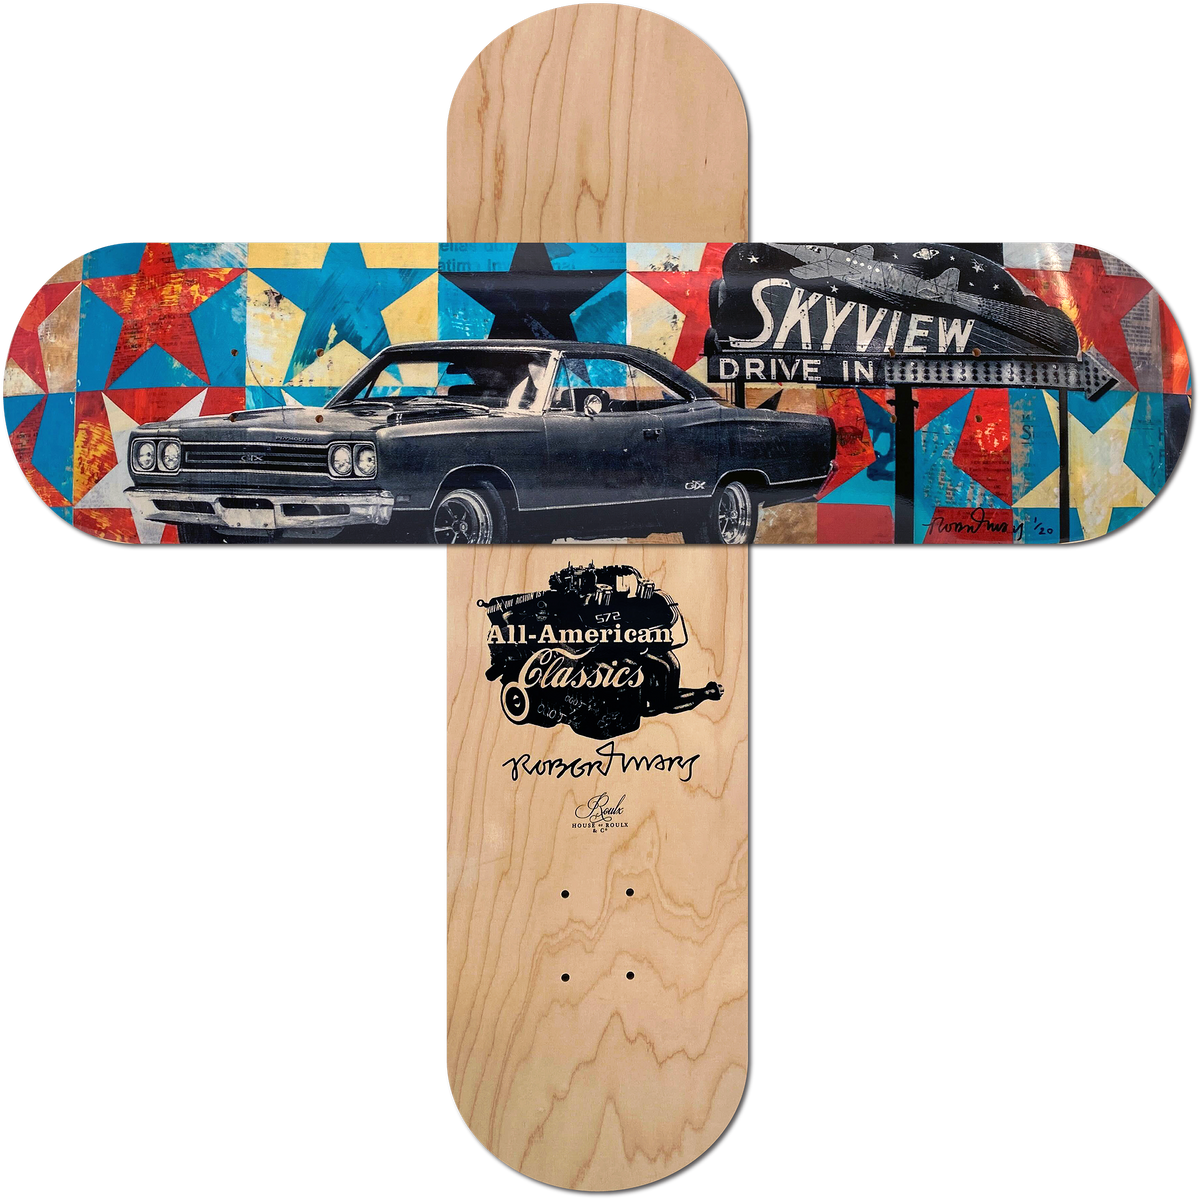 Robert Mars &quot;Friday Drive In&quot; - Skate Deck, Limited Edition of 20